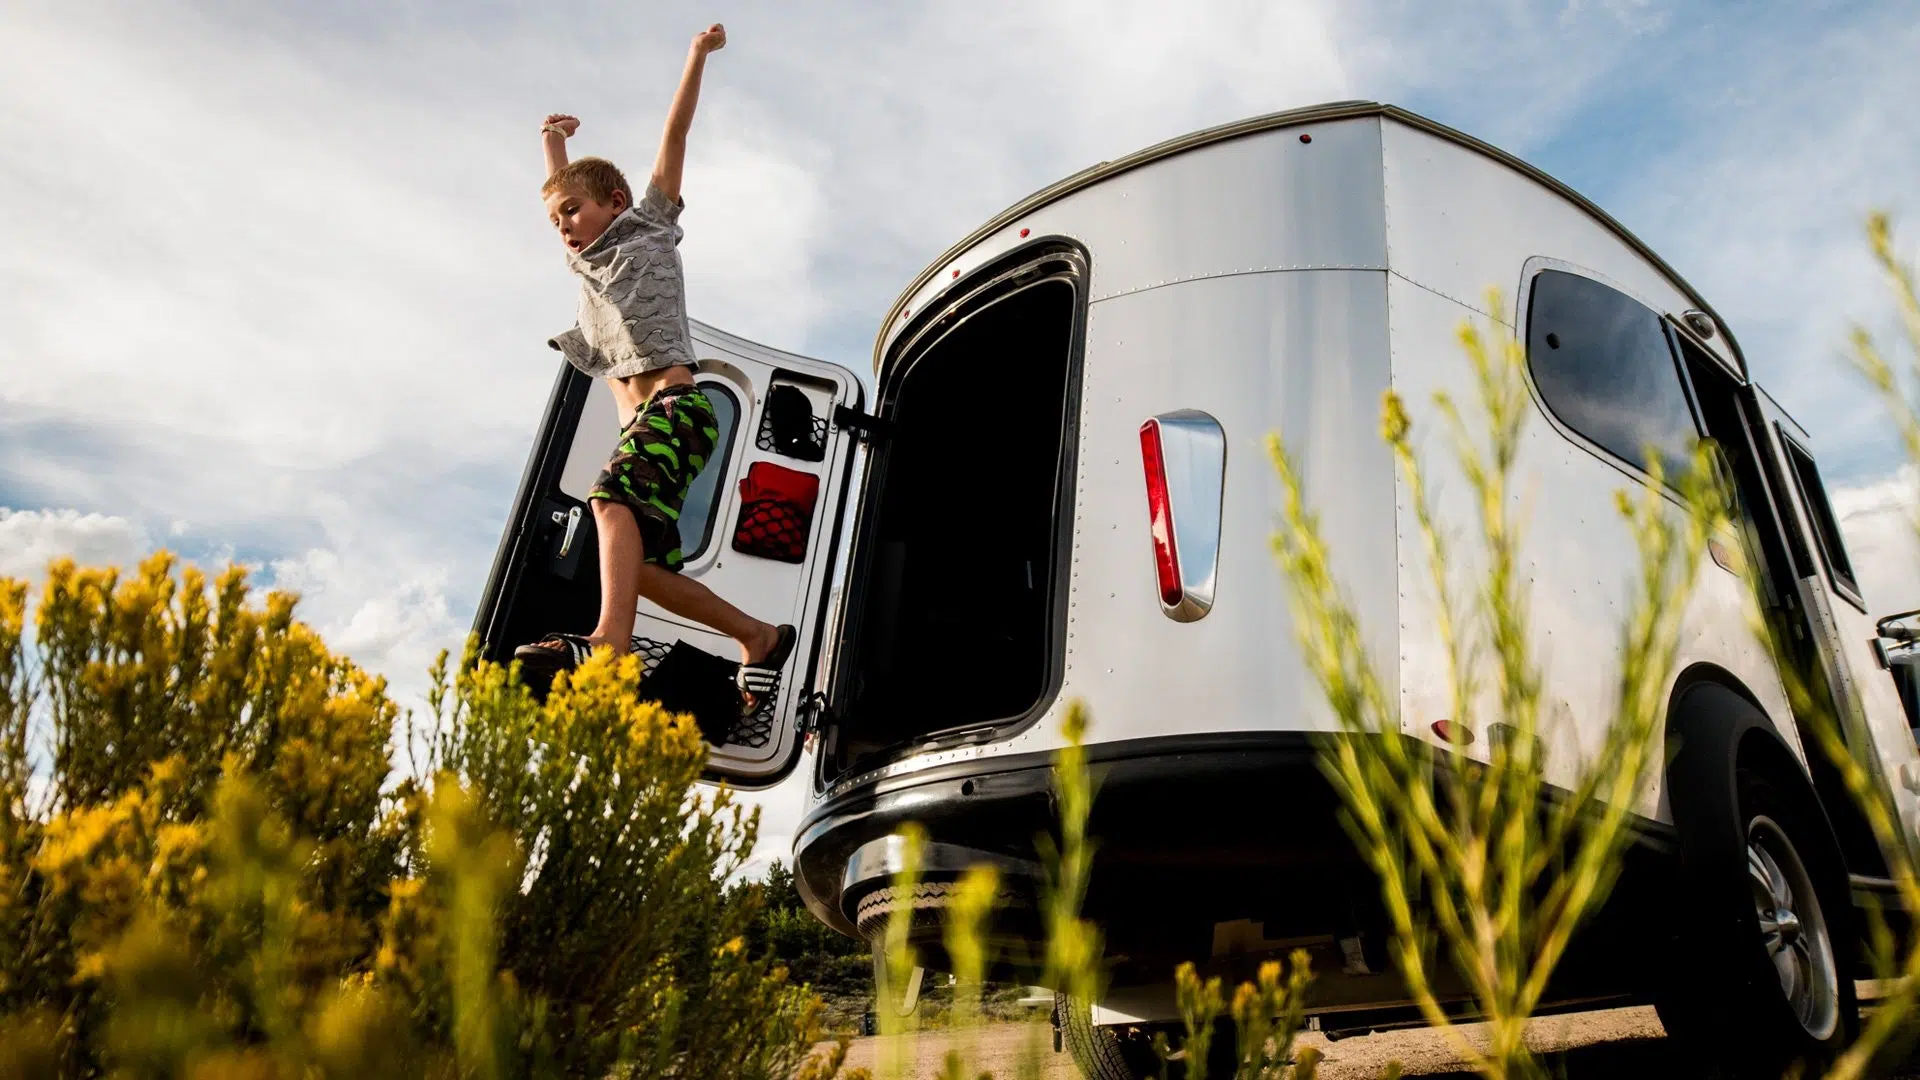 Airstream’s Basecamp Product Launch